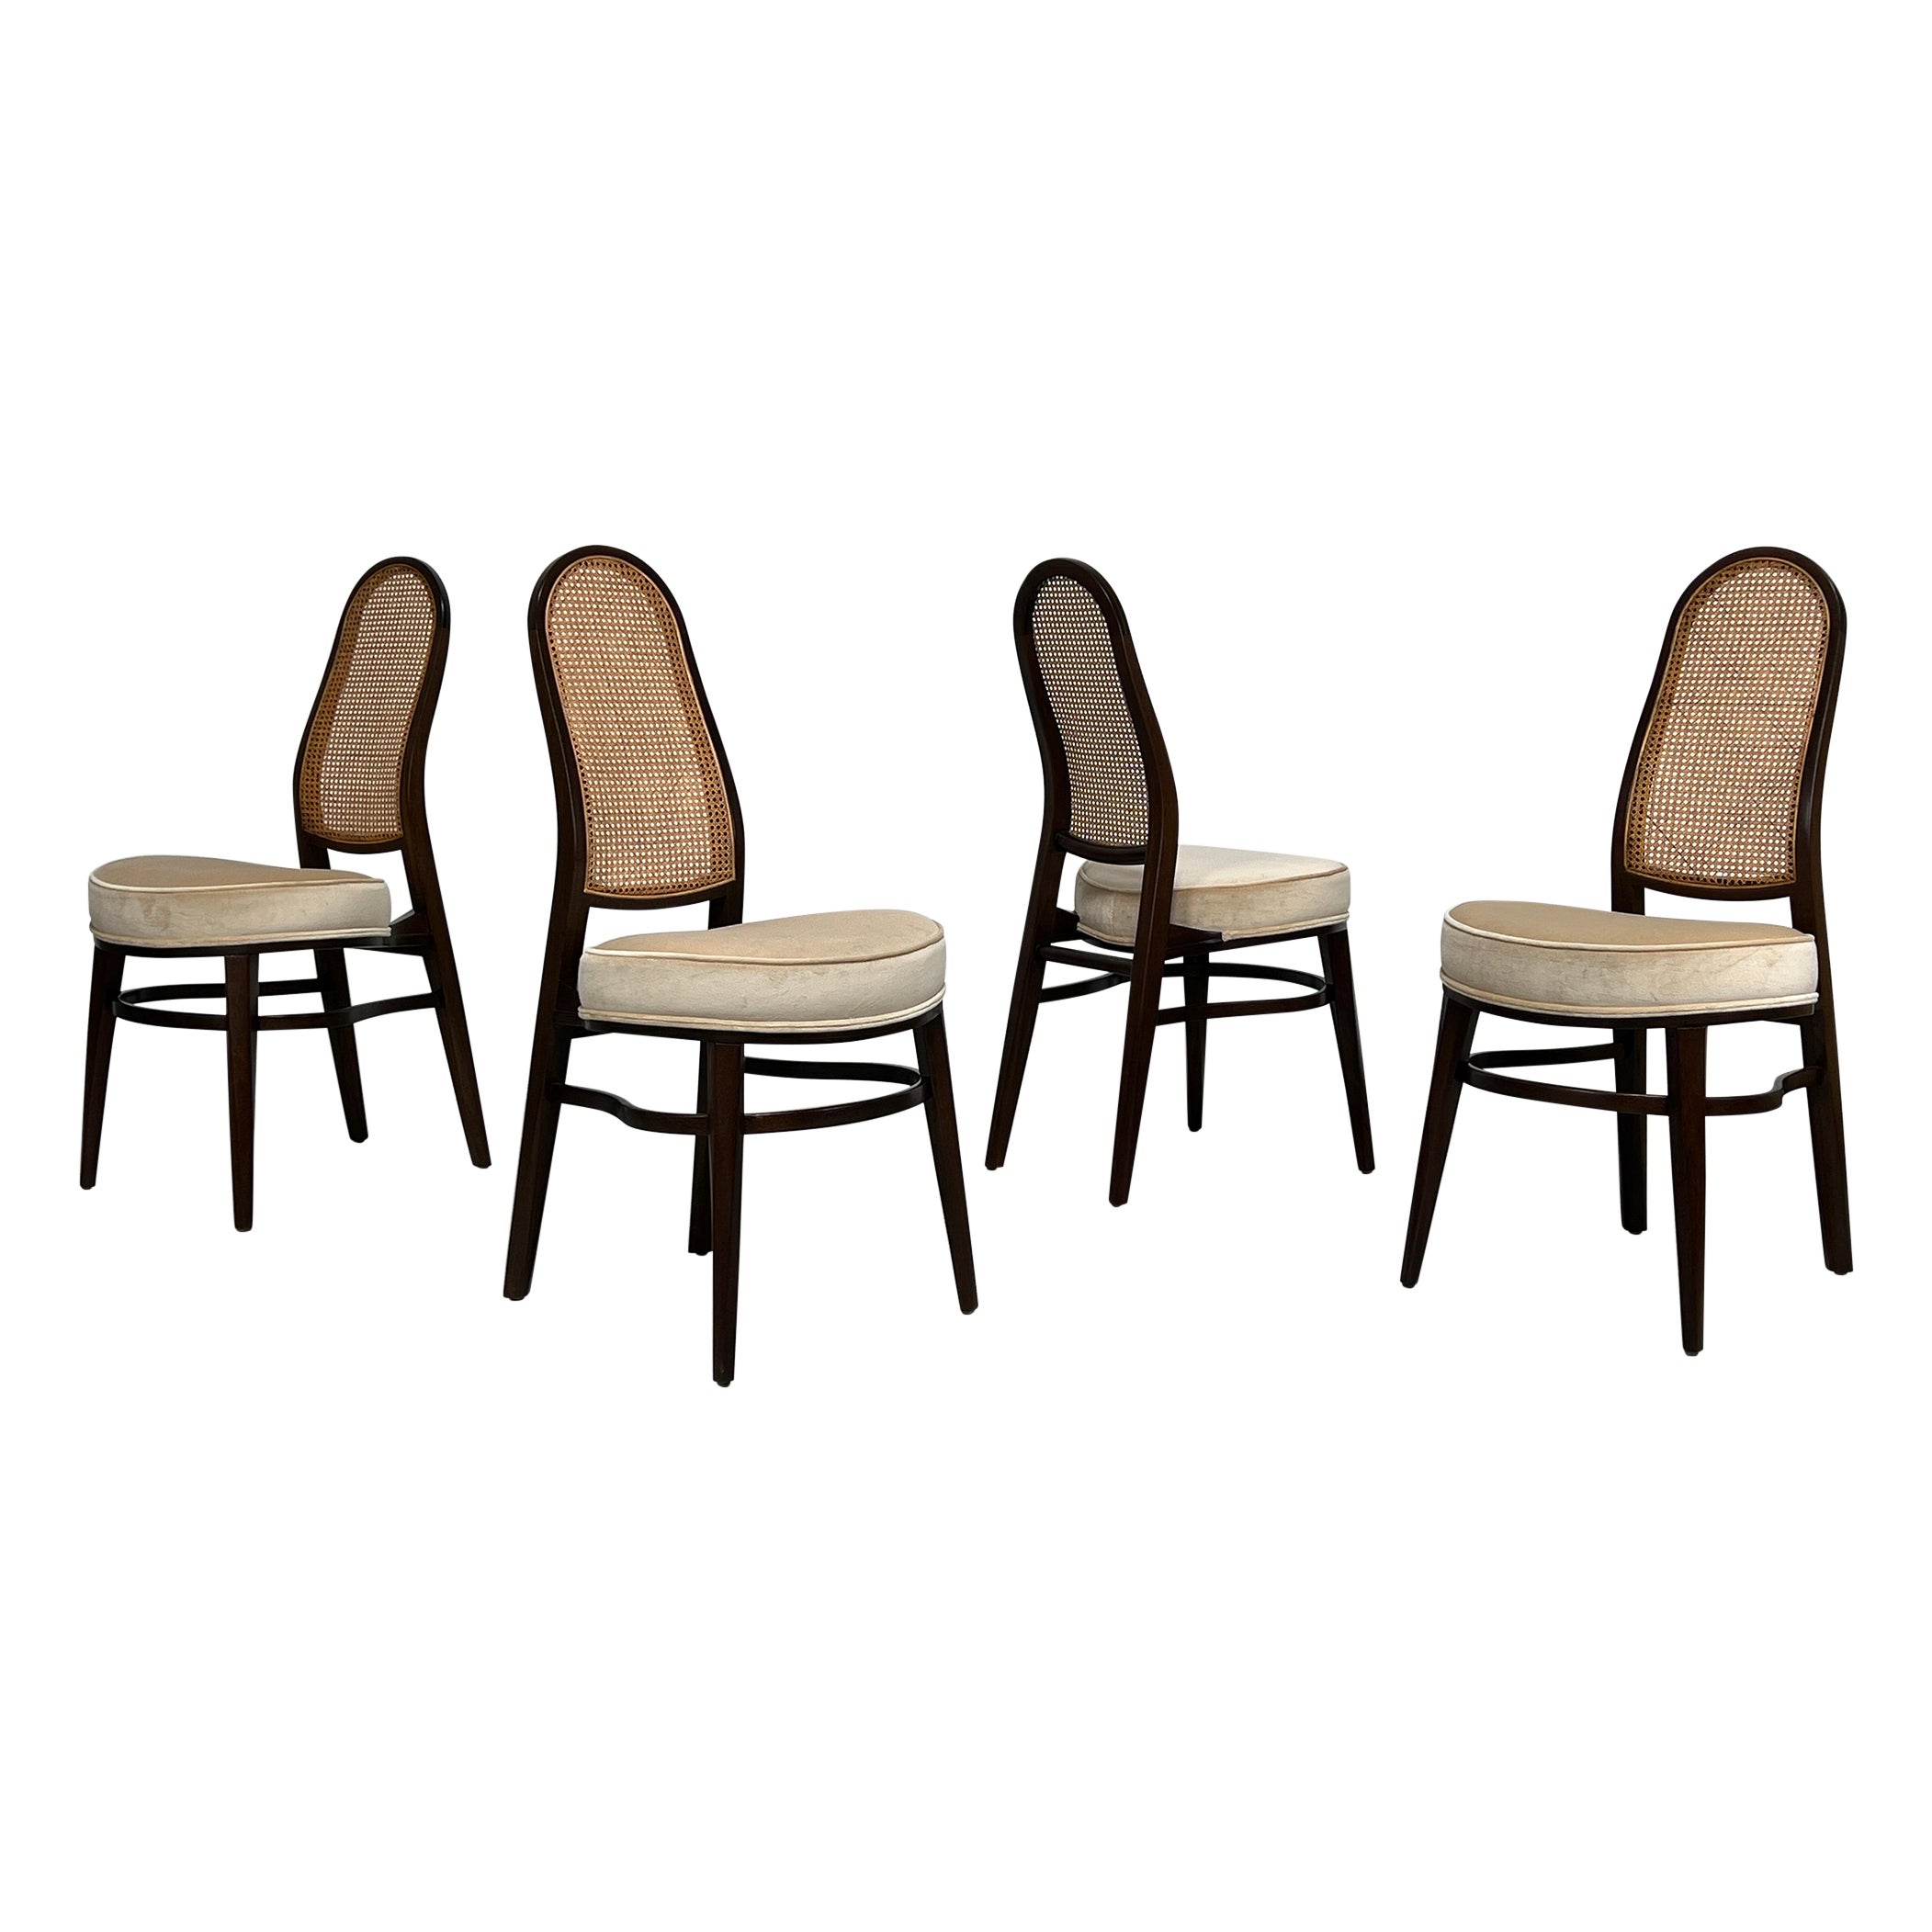 Set of Four Dining Chairs by Edward Wormley for Dunbar For Sale